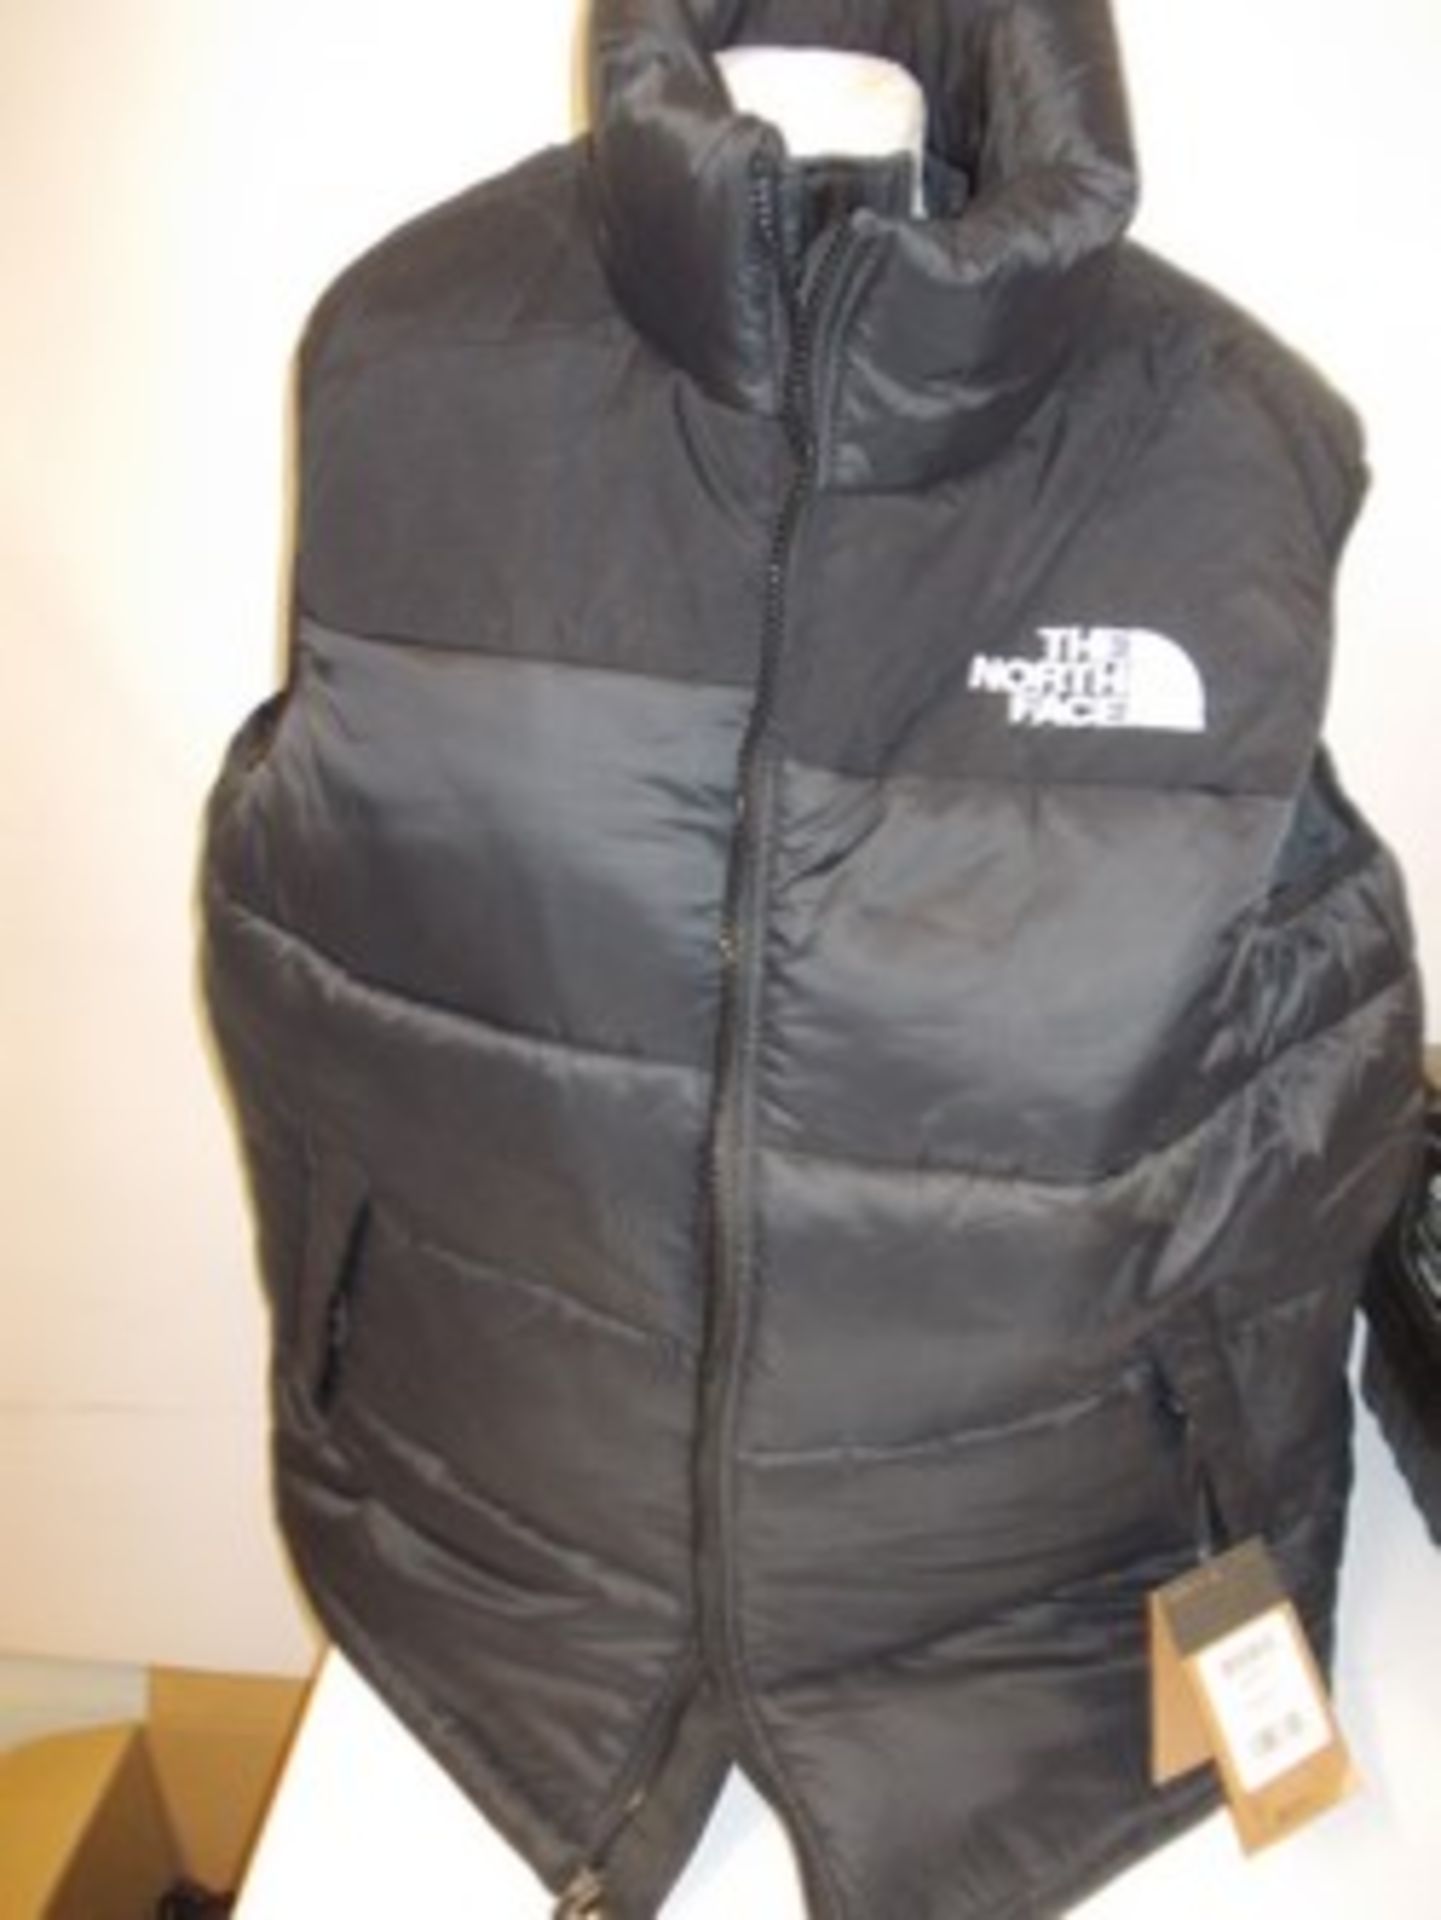 2 x The North Face synthetic quilted vests, both size L - New with tags (E2A)